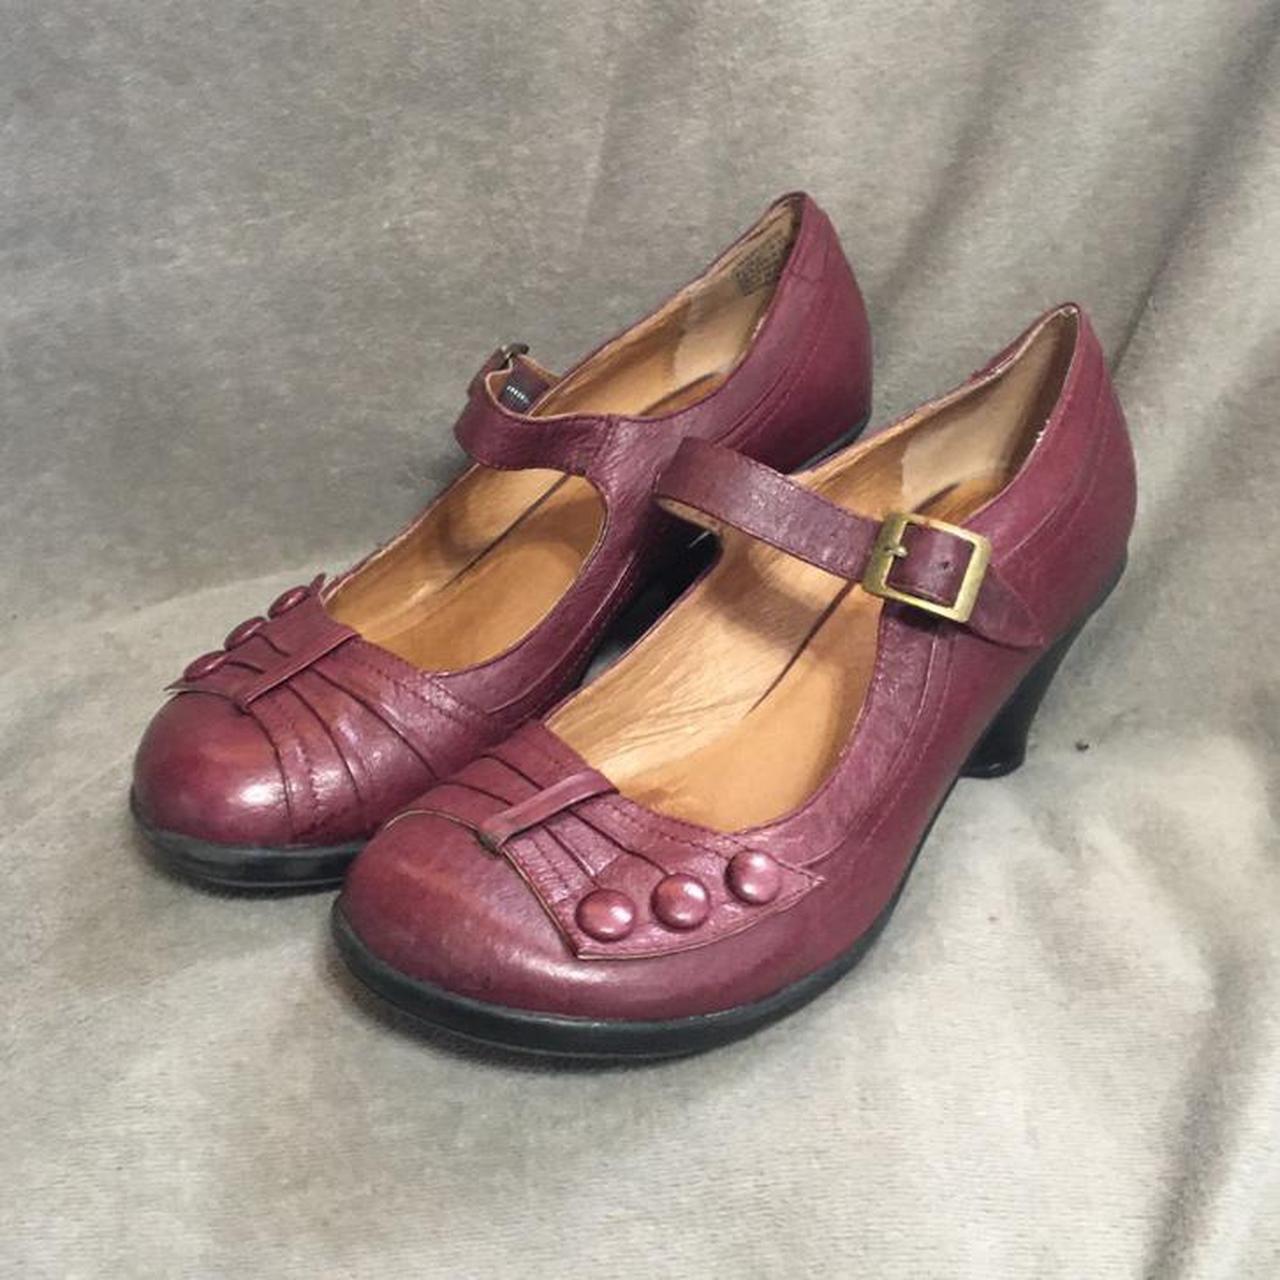 Womens Burgundy Leather Mary Janes Shoes, Women Mary Jane 